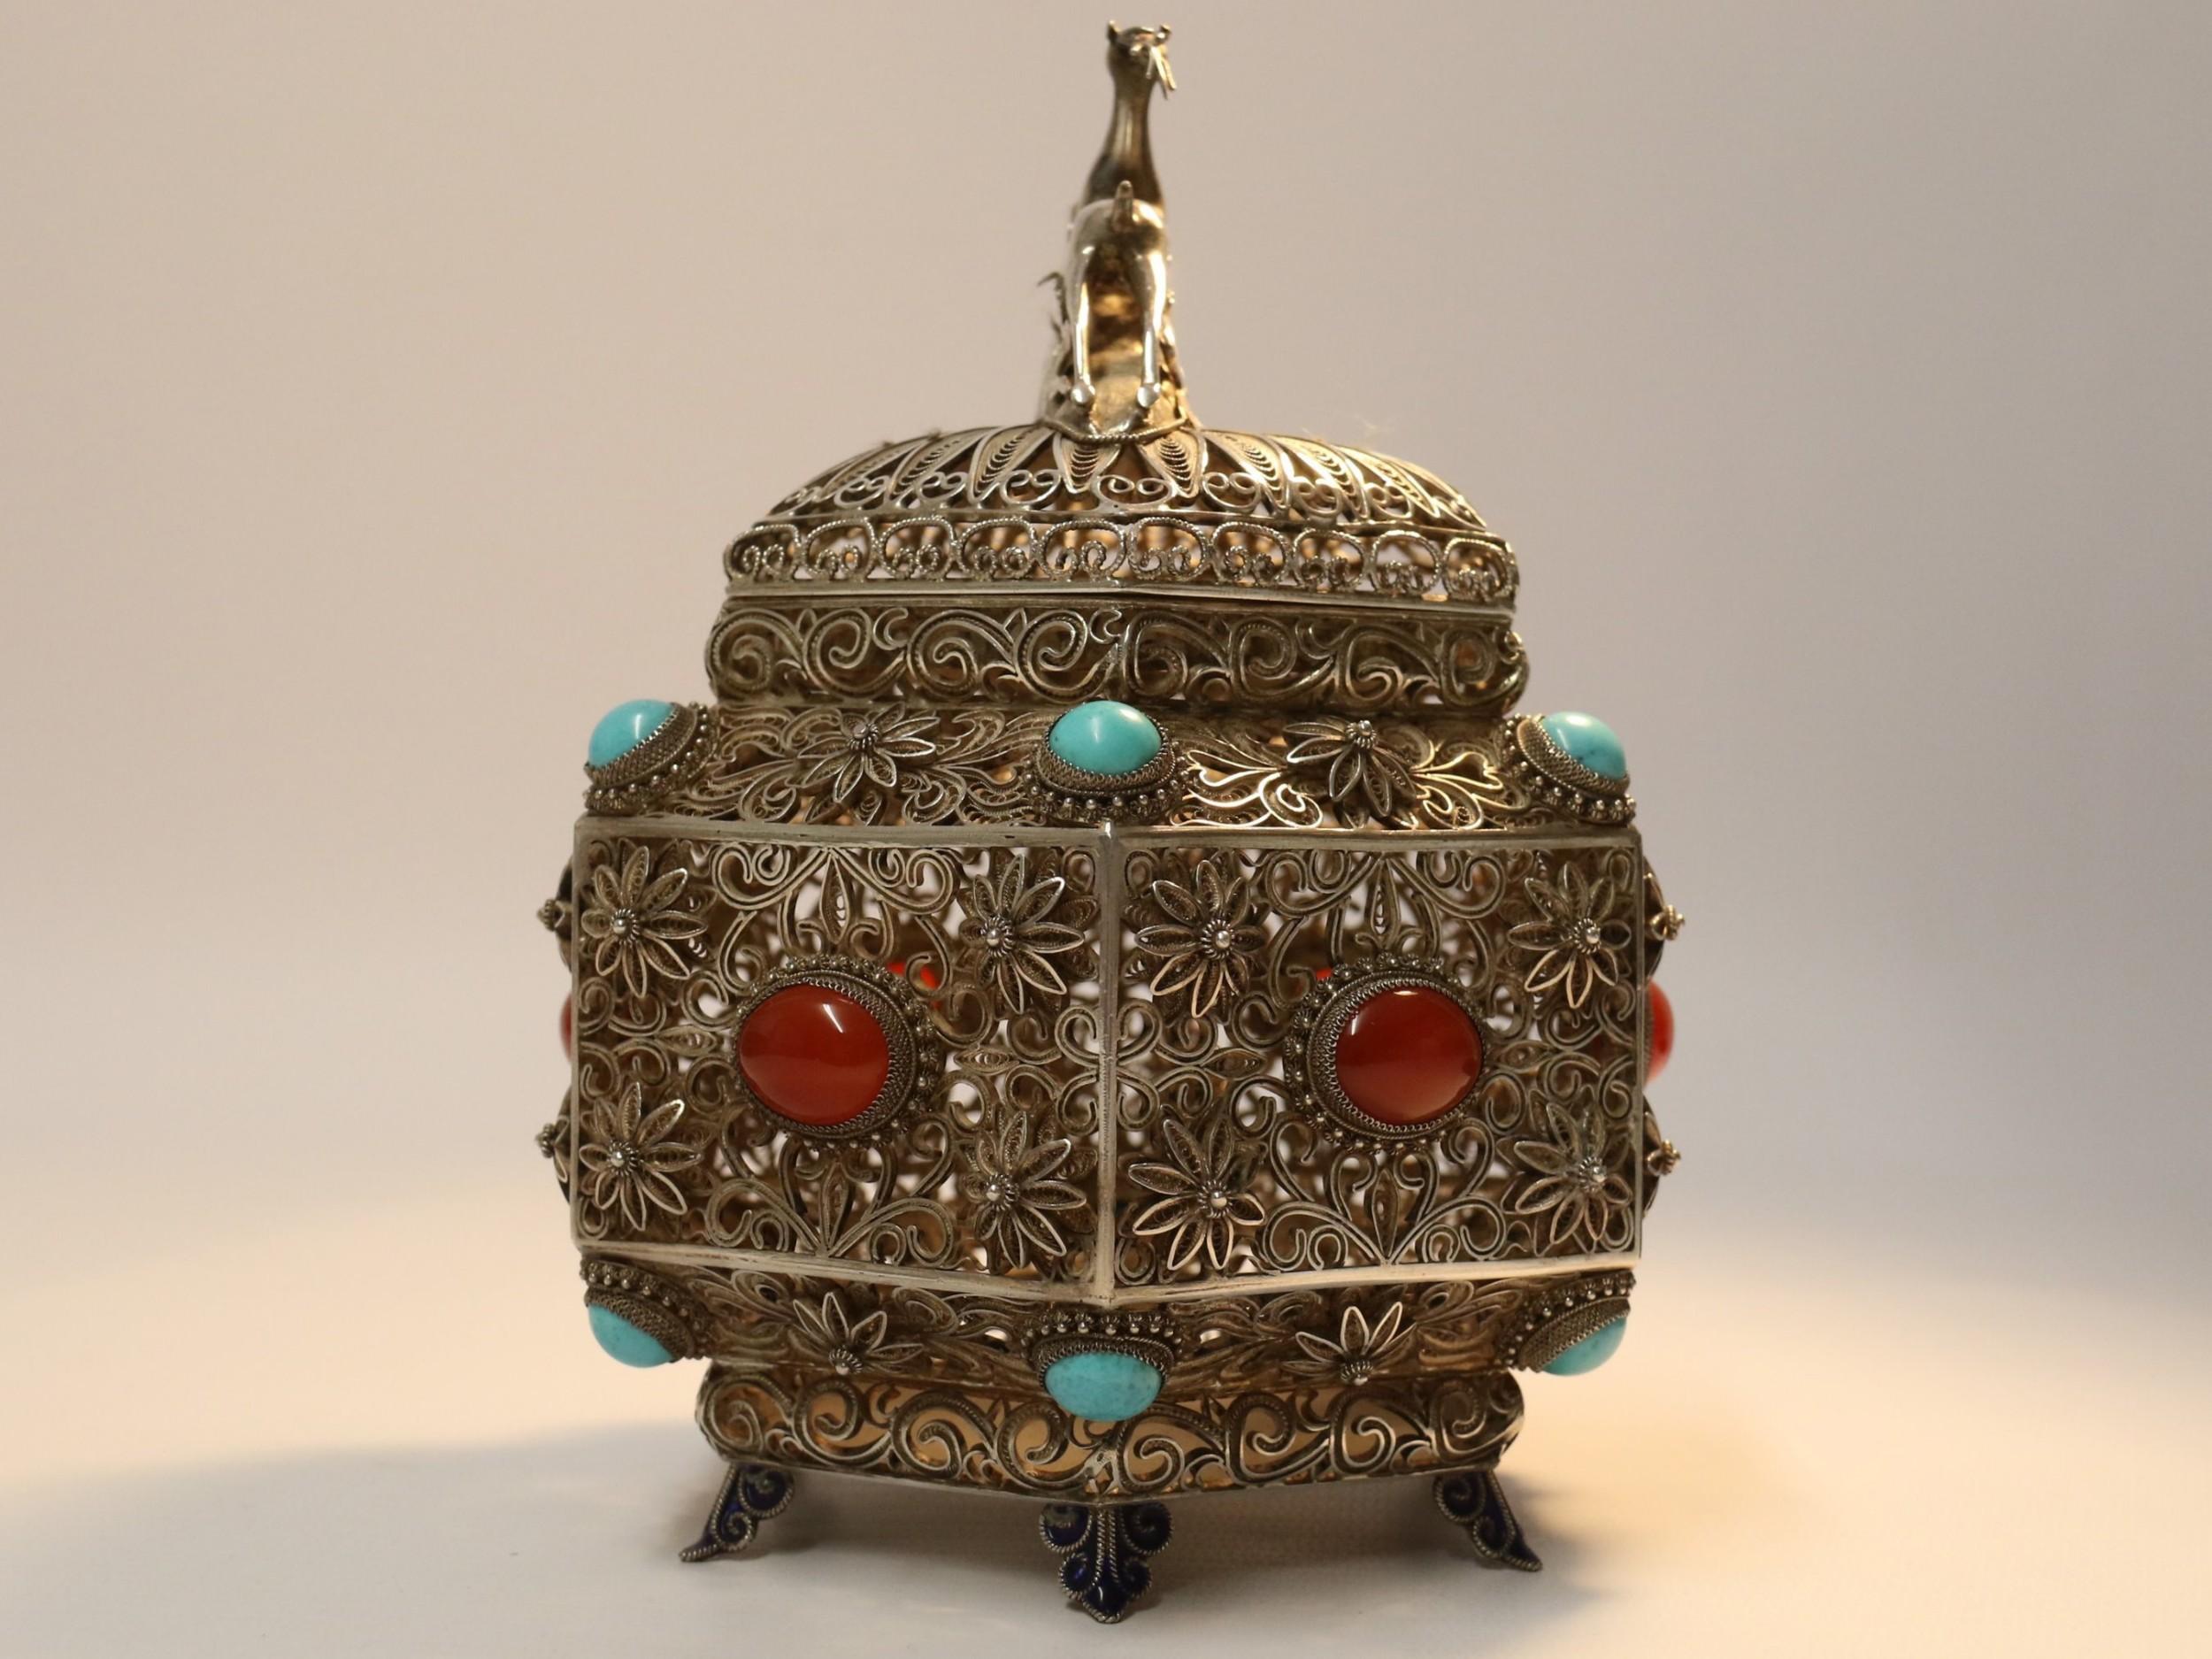 19th Century Indian Silver Filigree Work Incense Burner with Mounted Cabochons For Sale 2